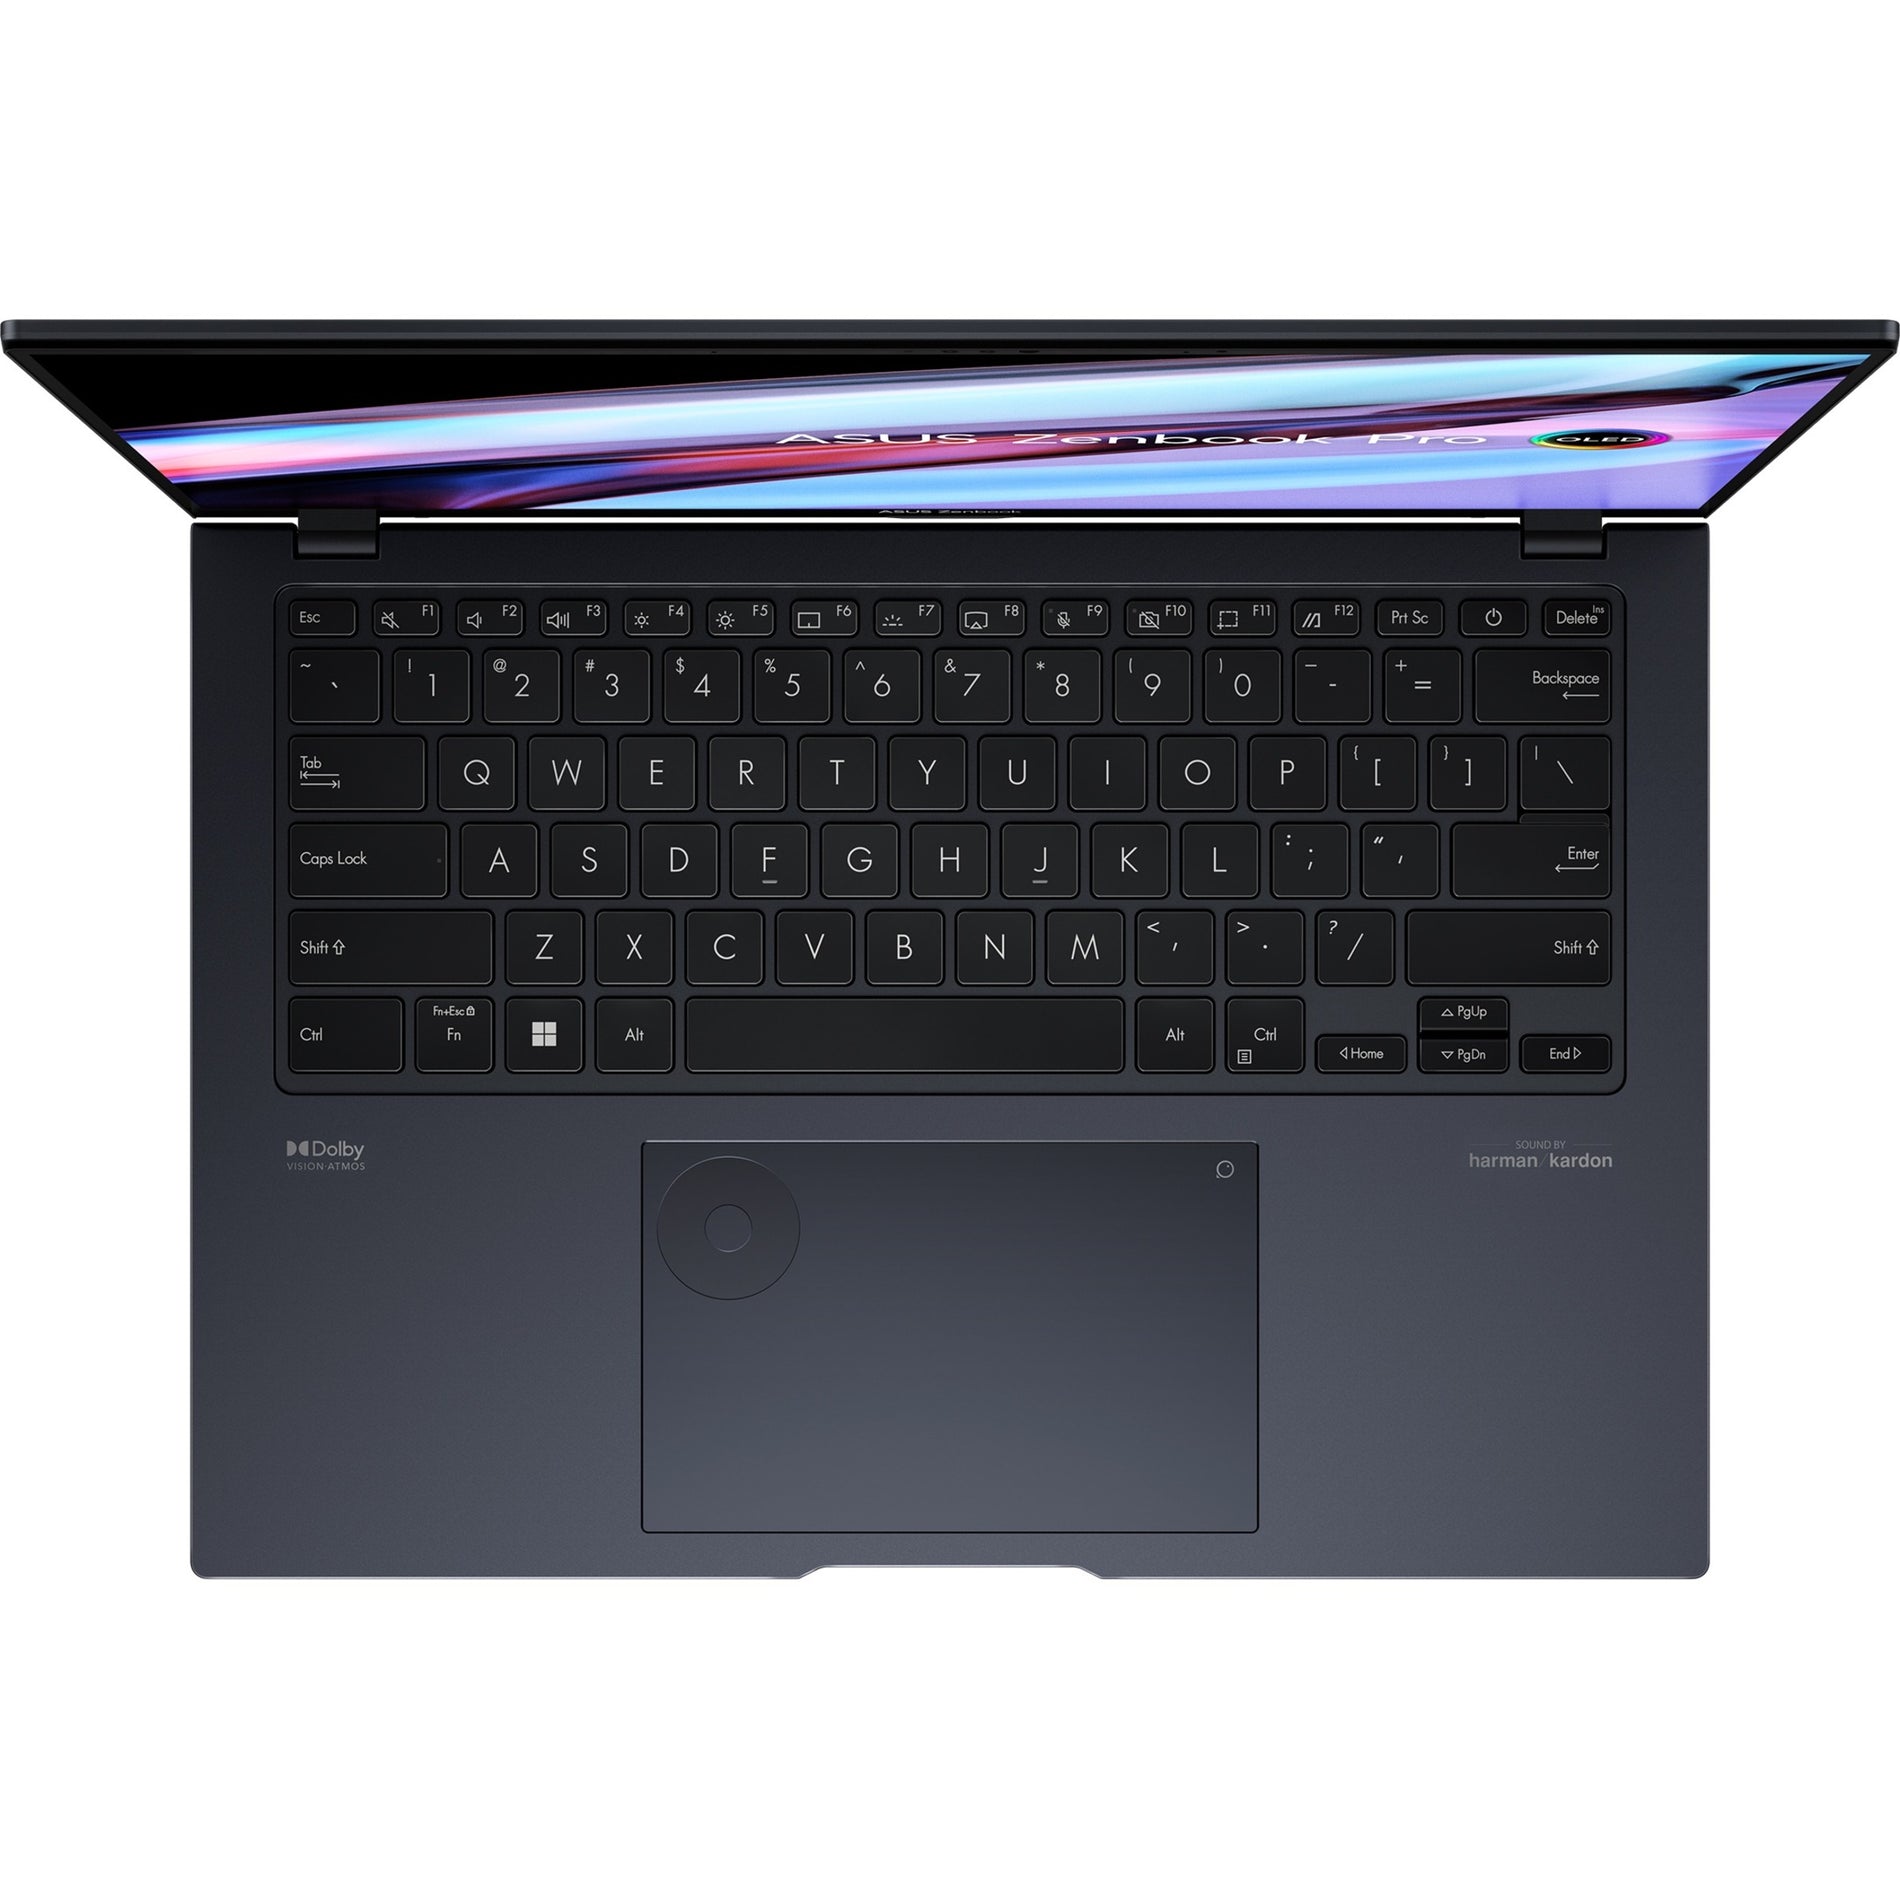 Asus UX6404VV-DS94T Zenbook Pro 14 OLED Notebook, 14.5", Core i9, 16GB RAM, 1TB SSD, Windows 11